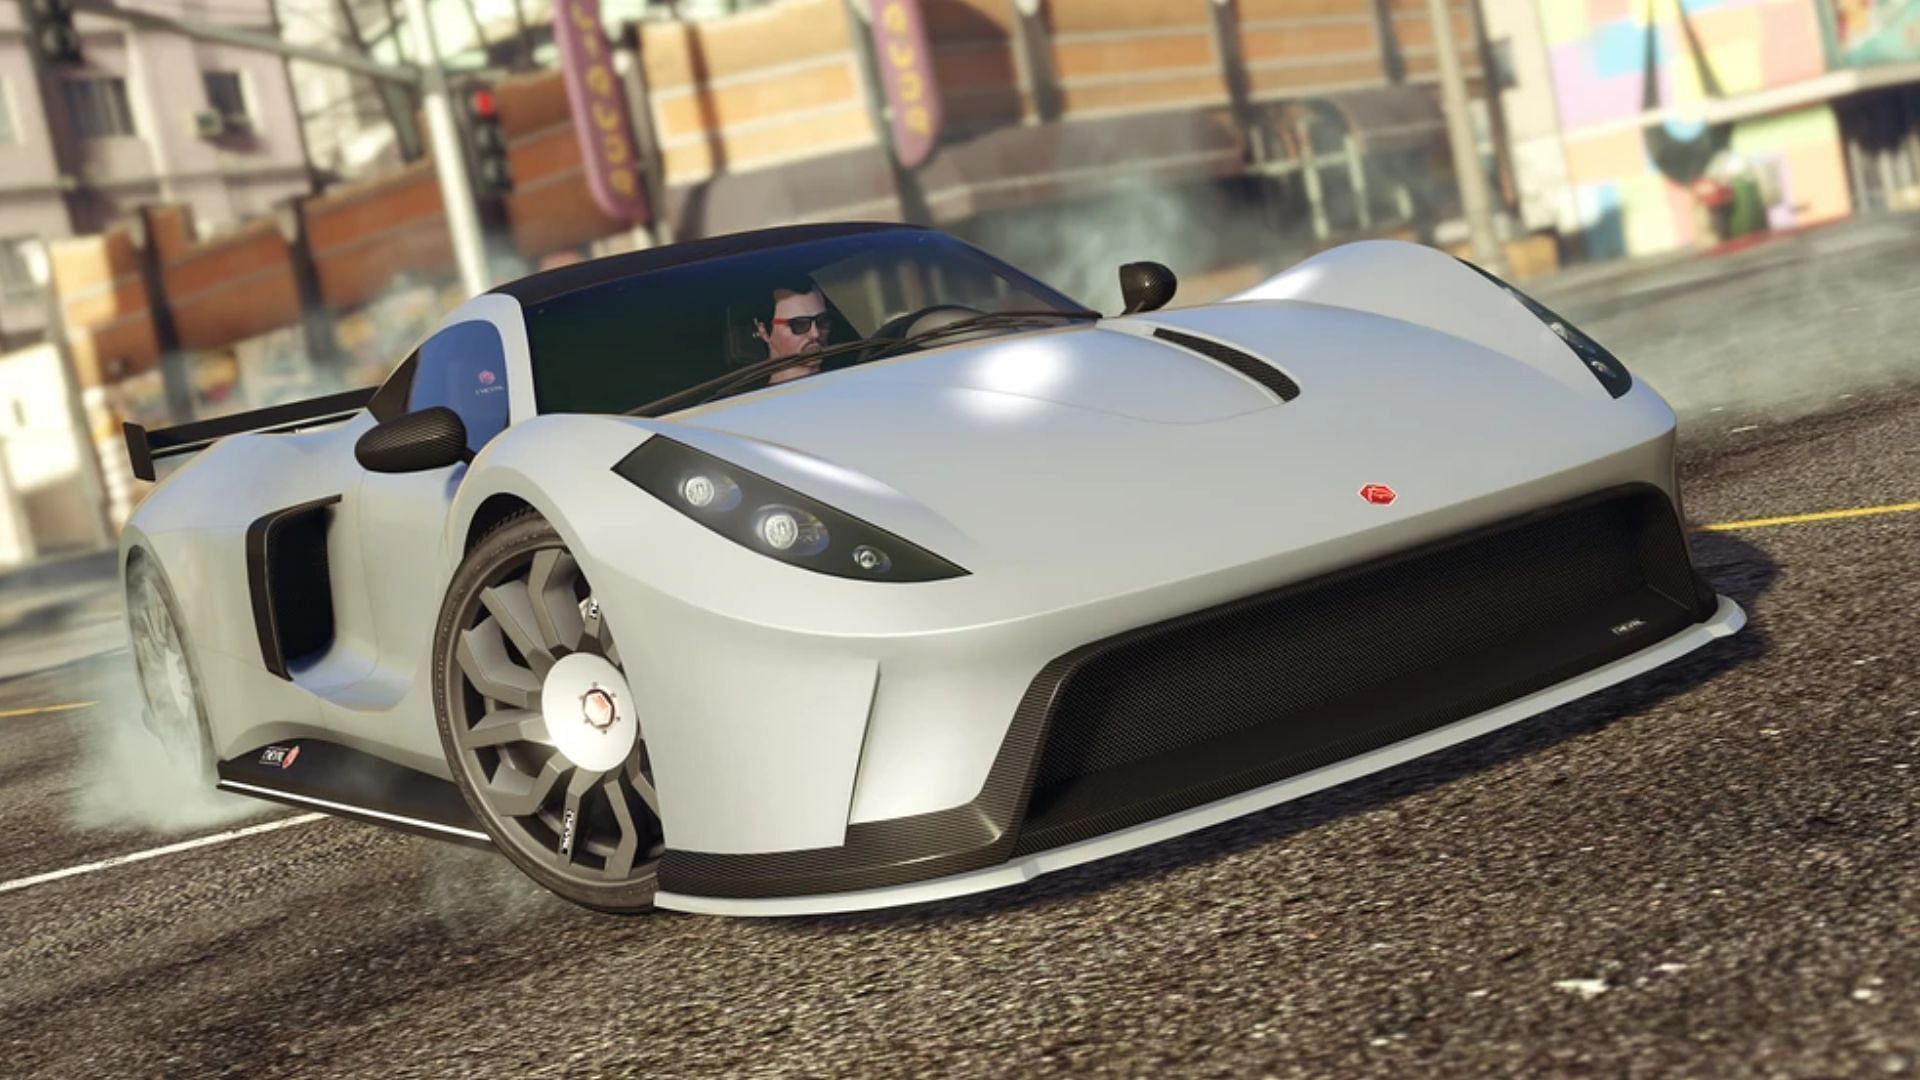 A promotional image for the Cheval Taipan in Grand Theft Auto 5 Online (Image via Rockstar Games)